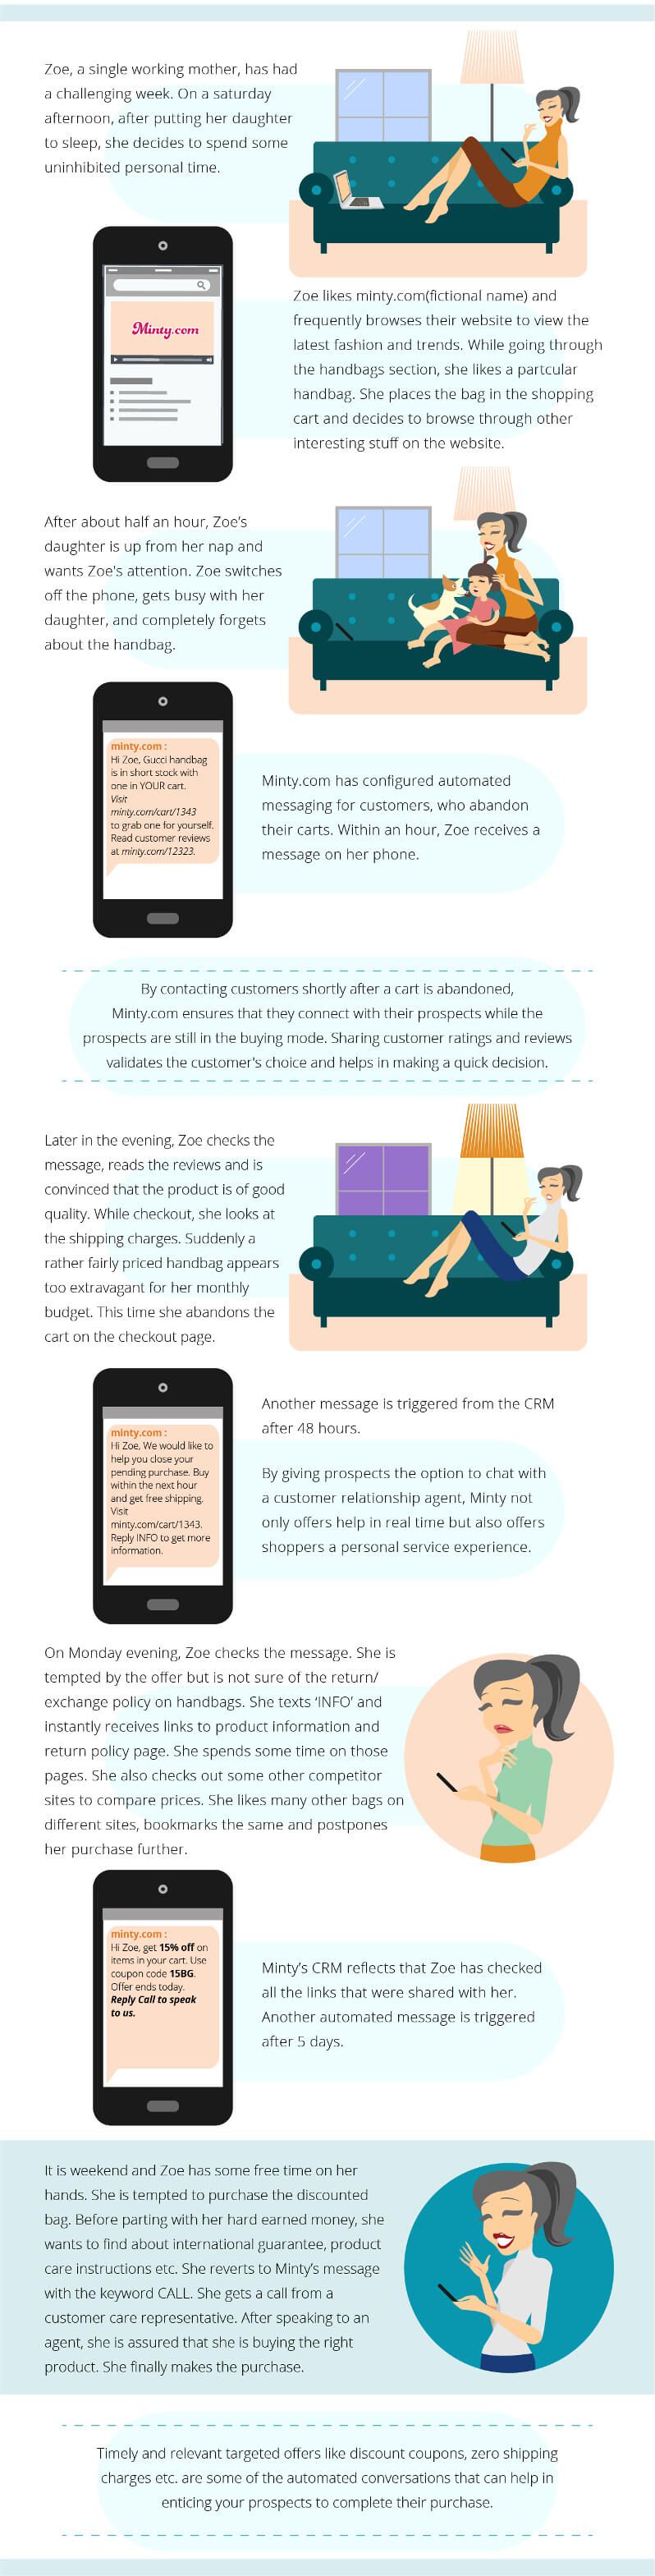 Infographic: How to tackle shopping cart abandonment with automated messages